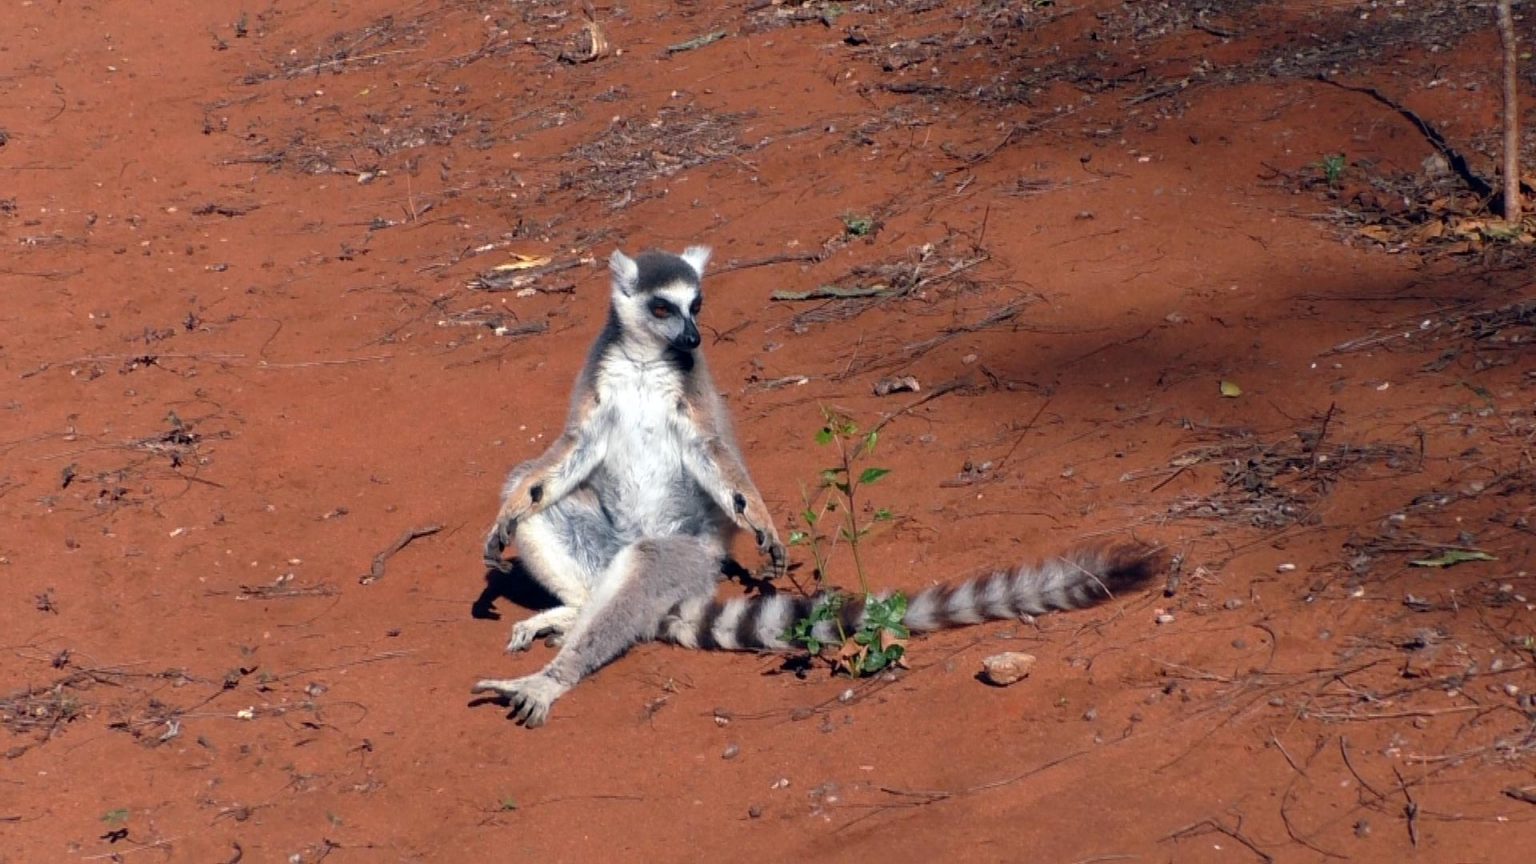 “stink Flirting” Male Ring Tail Lemurs Exude Fruity Smelling Perfume To Attract Mates